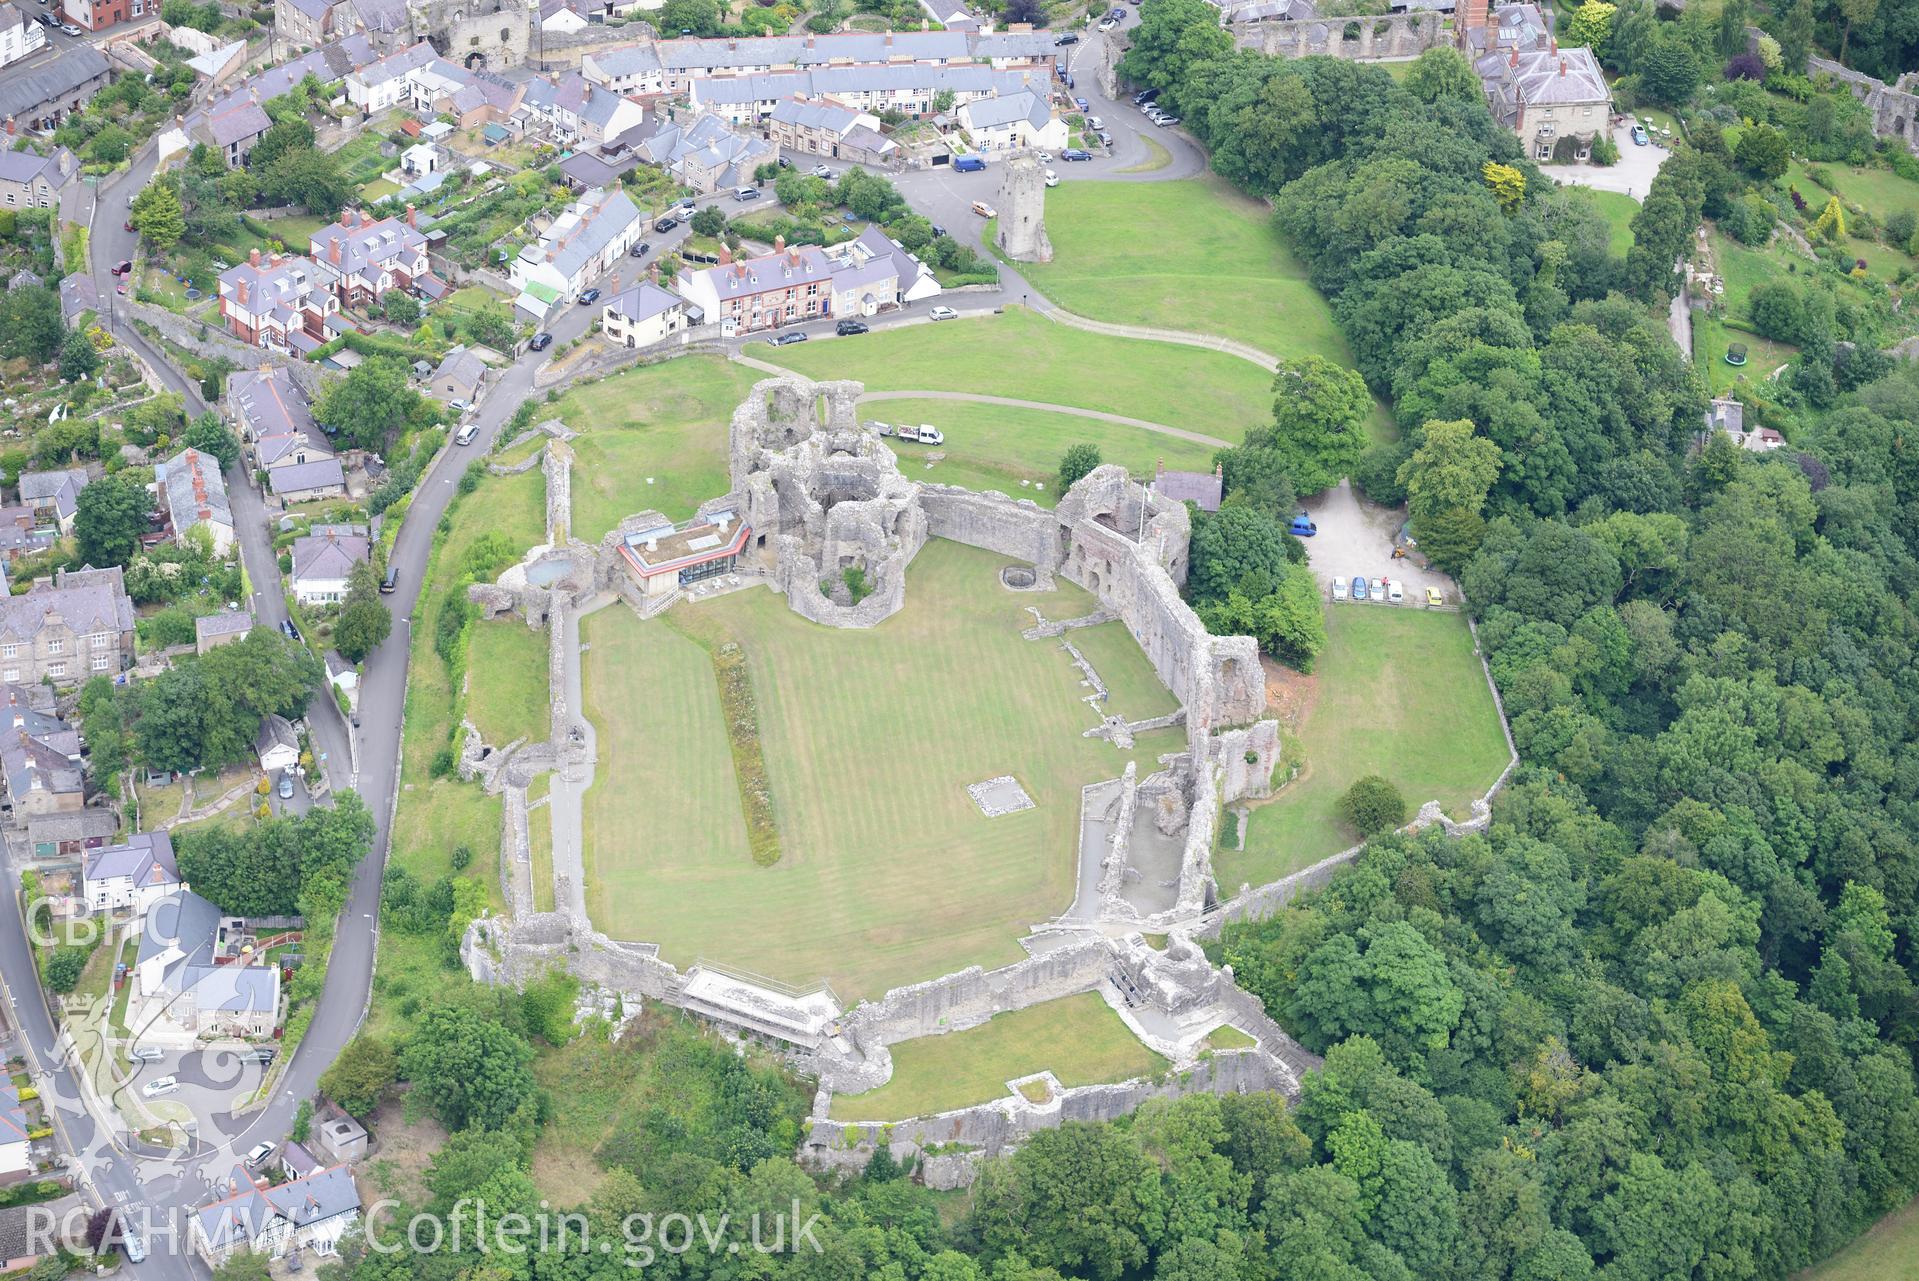 Denbigh Castle and Cottage, St Hilary's Chapel, town walls, visitor centre, Gwalia Villas and Coed Cwningaer. Oblique aerial photograph taken during the Royal Commission?s programme of archaeological aerial reconnaissance by Toby Driver on 30th July 2015.